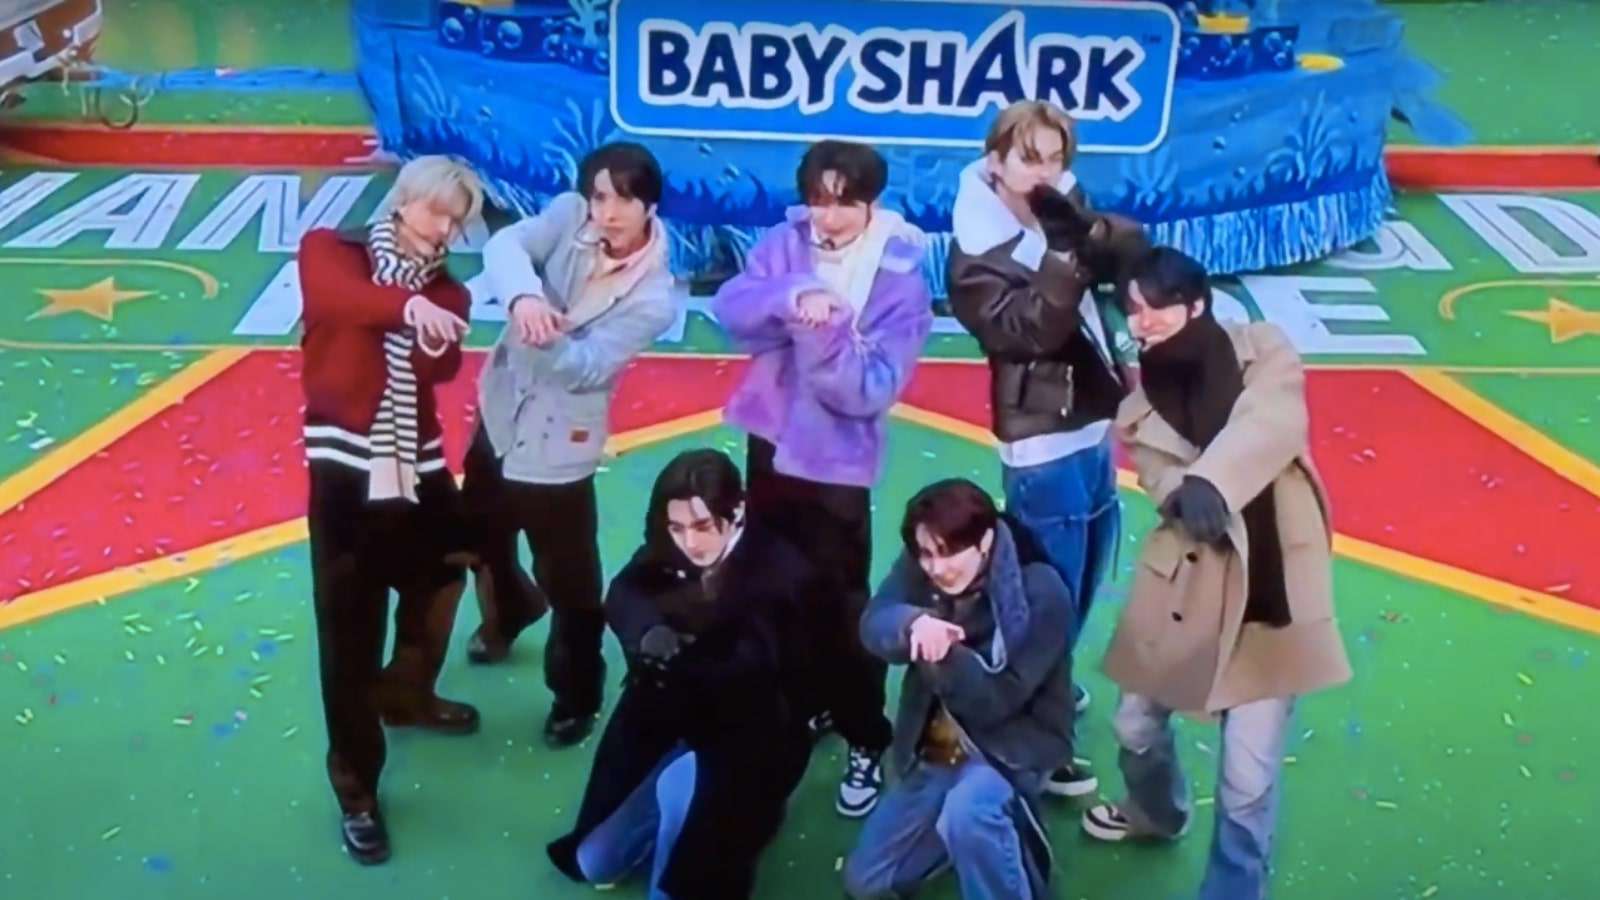 K-pop group Enhypen make shark gestures with their hands on a TV show